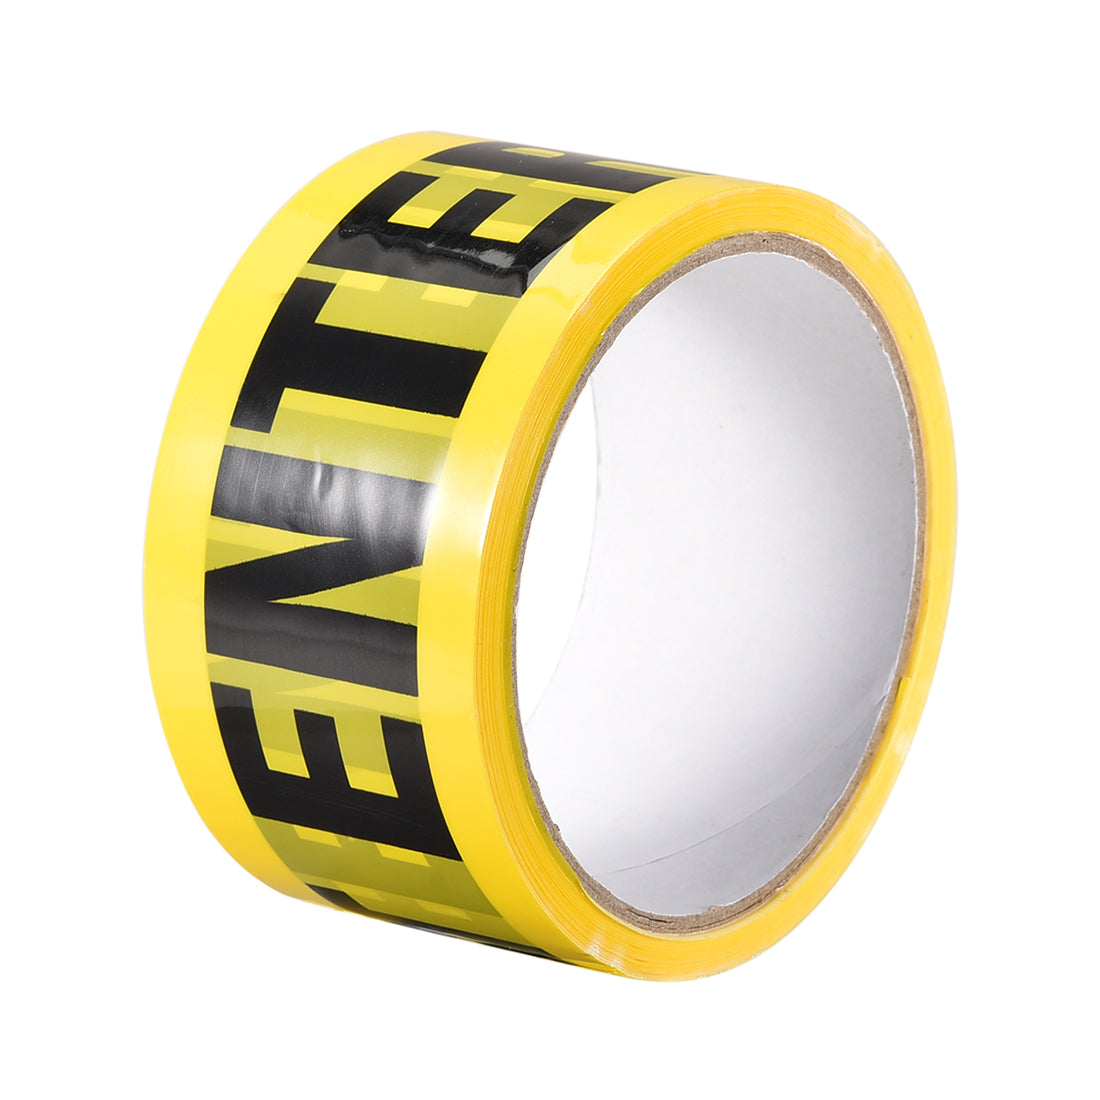 uxcell Uxcell Caution Warning Stripe Sticker Adhesive Tape Bold DO NOT ENTER Marking, 82 Ft x 2 Inch(LxW), Yellow Black for Workplace Wet Floor Caution